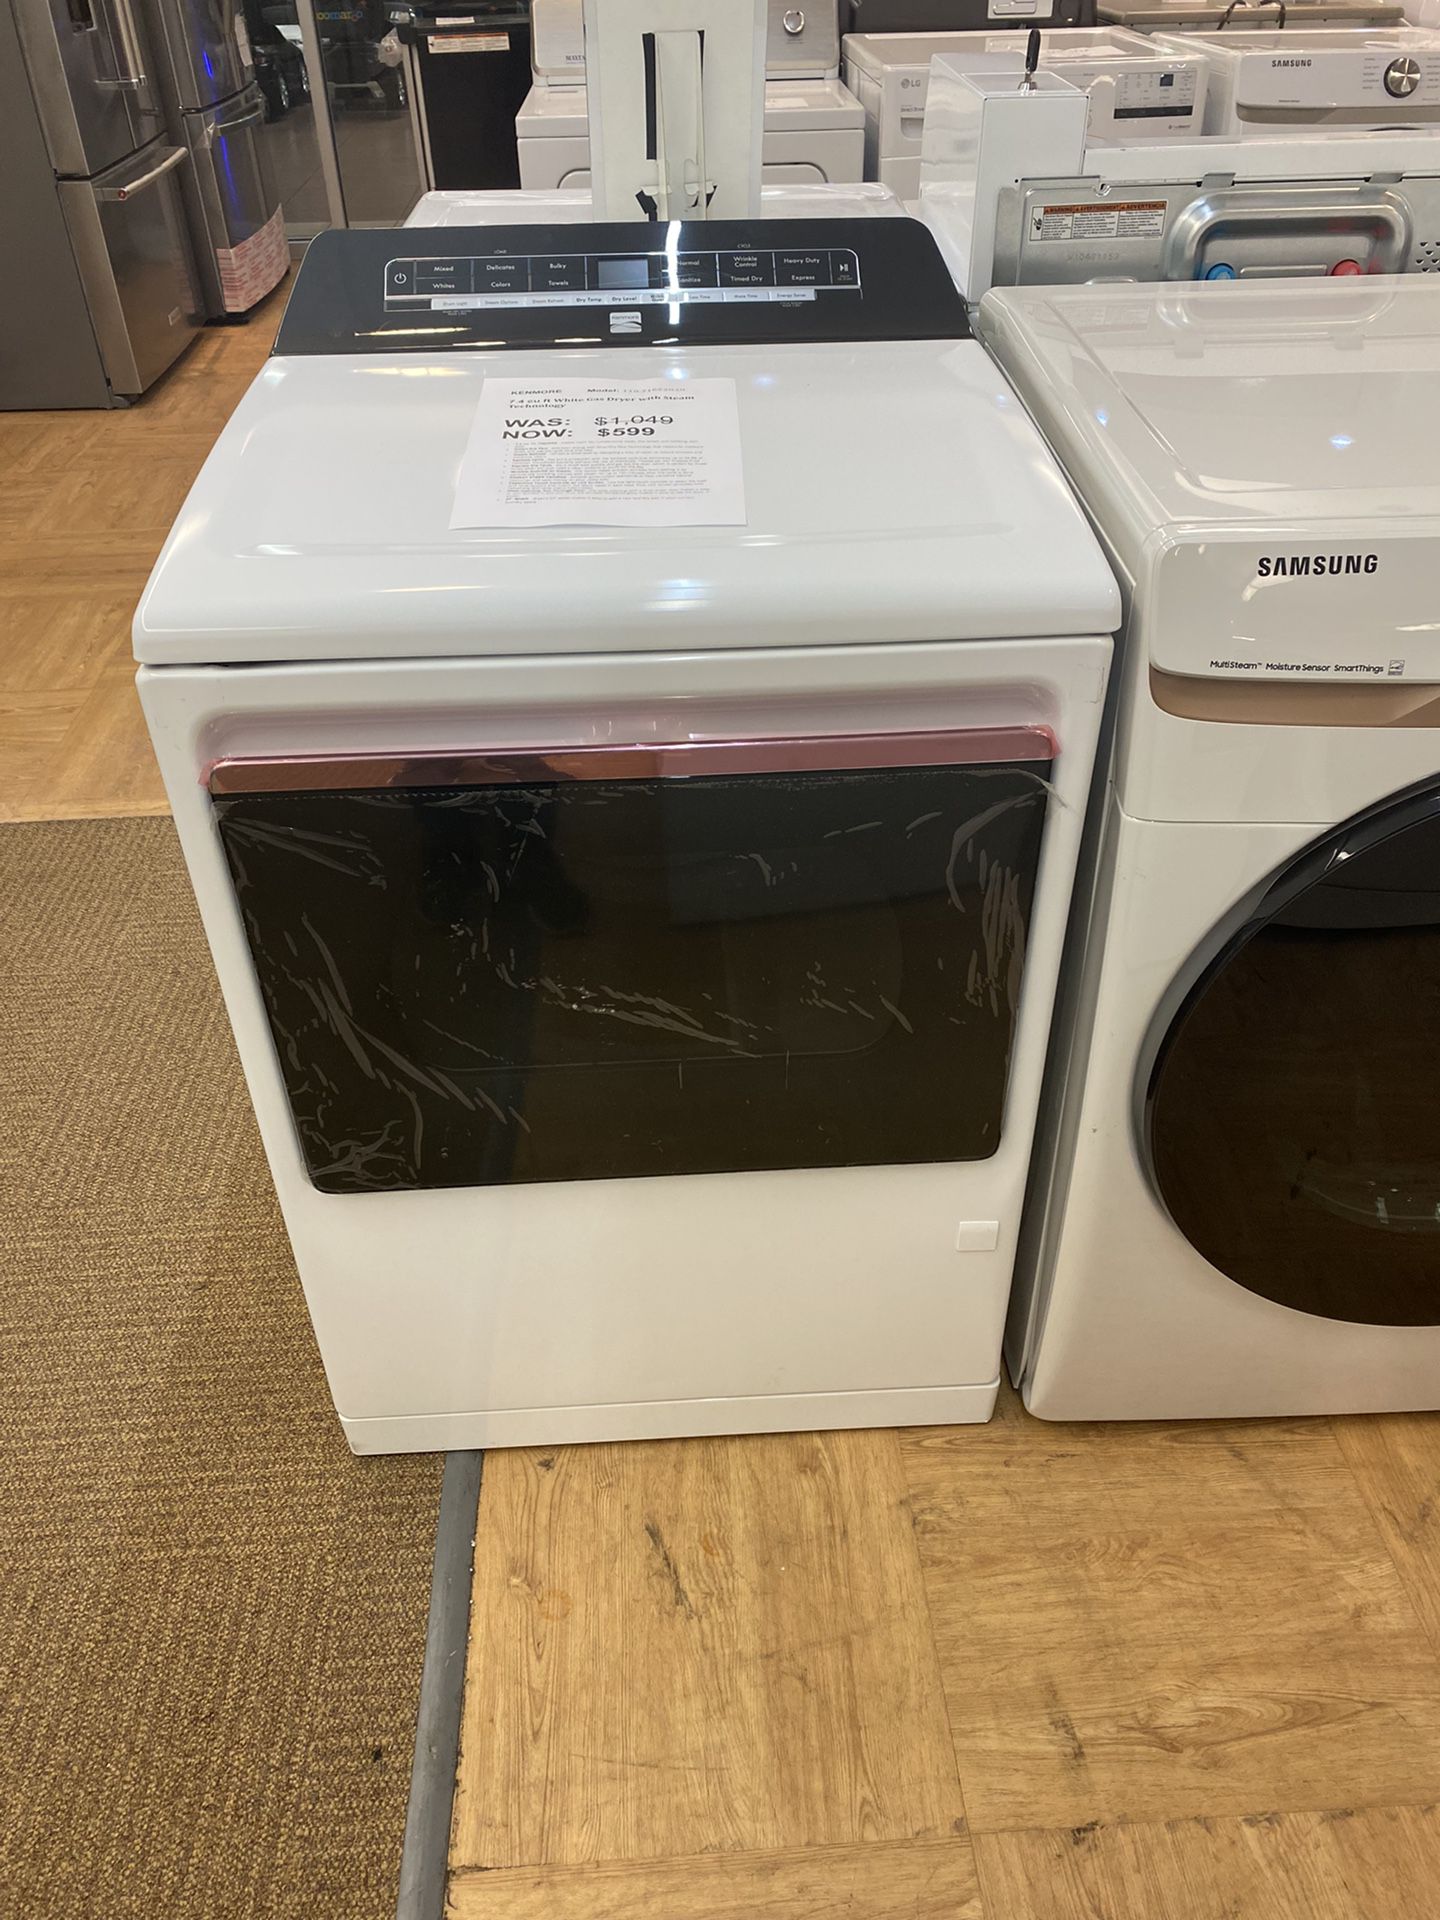 New Kenmore Gas Dryer